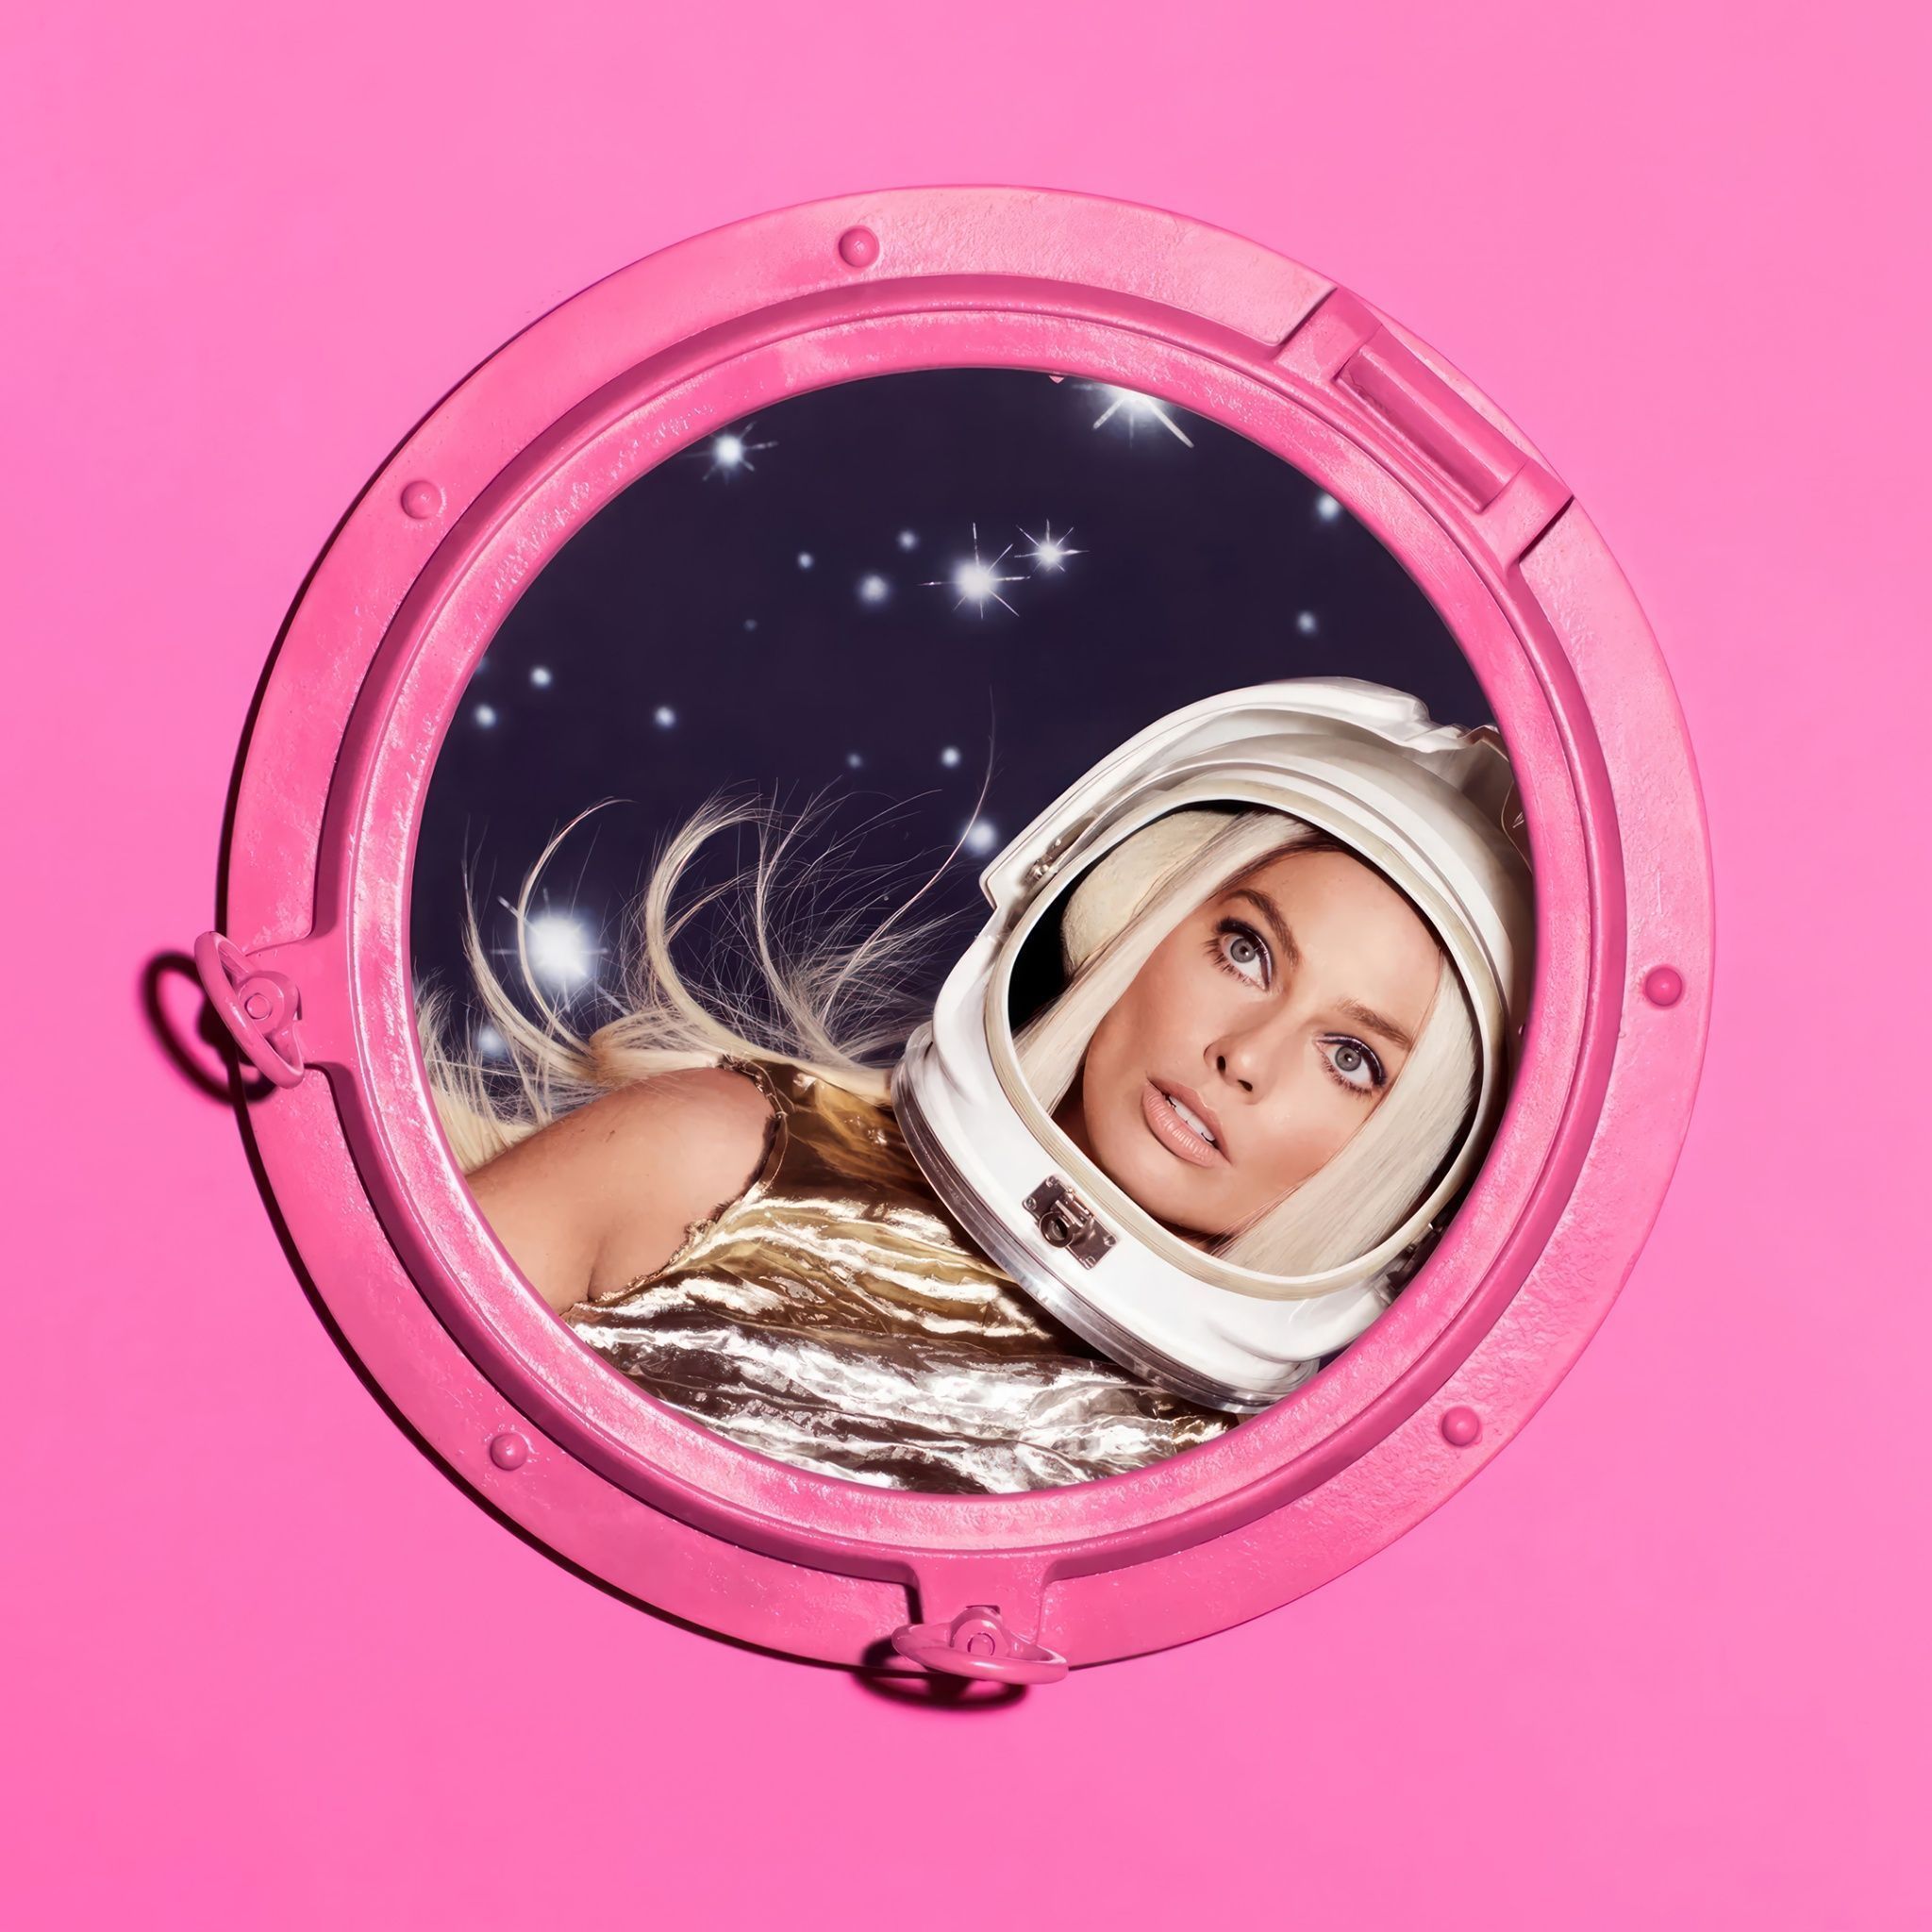 A woman in an astronaut helmet looks out of a round window. - Barbie